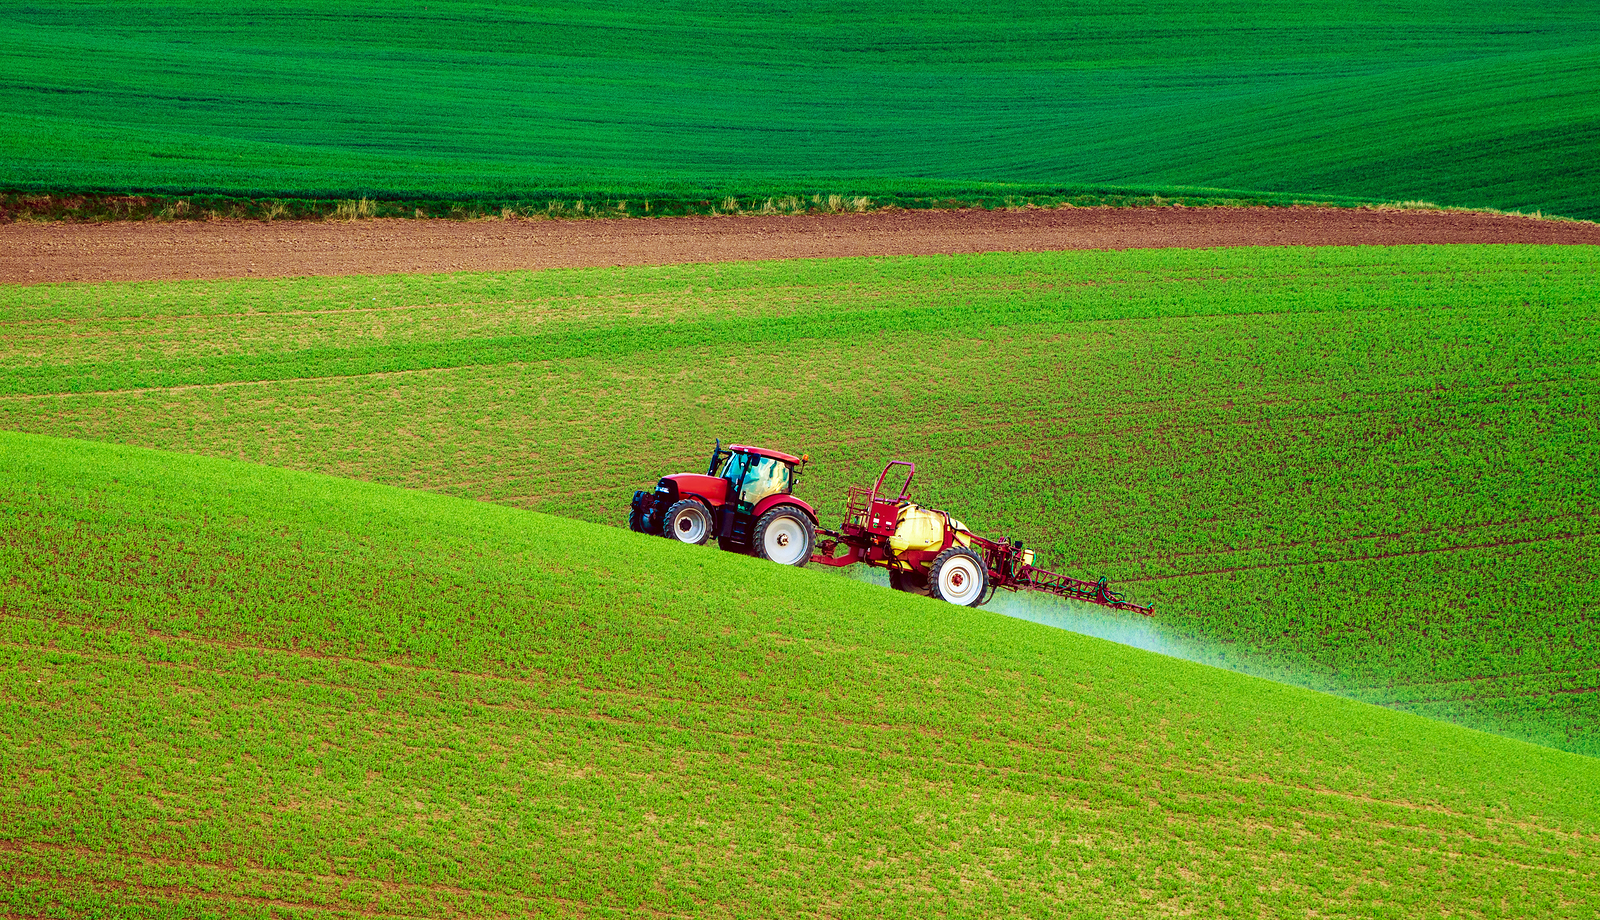 Farm machinery spraying insecticide drives up a lush, green, rolling hill in spring